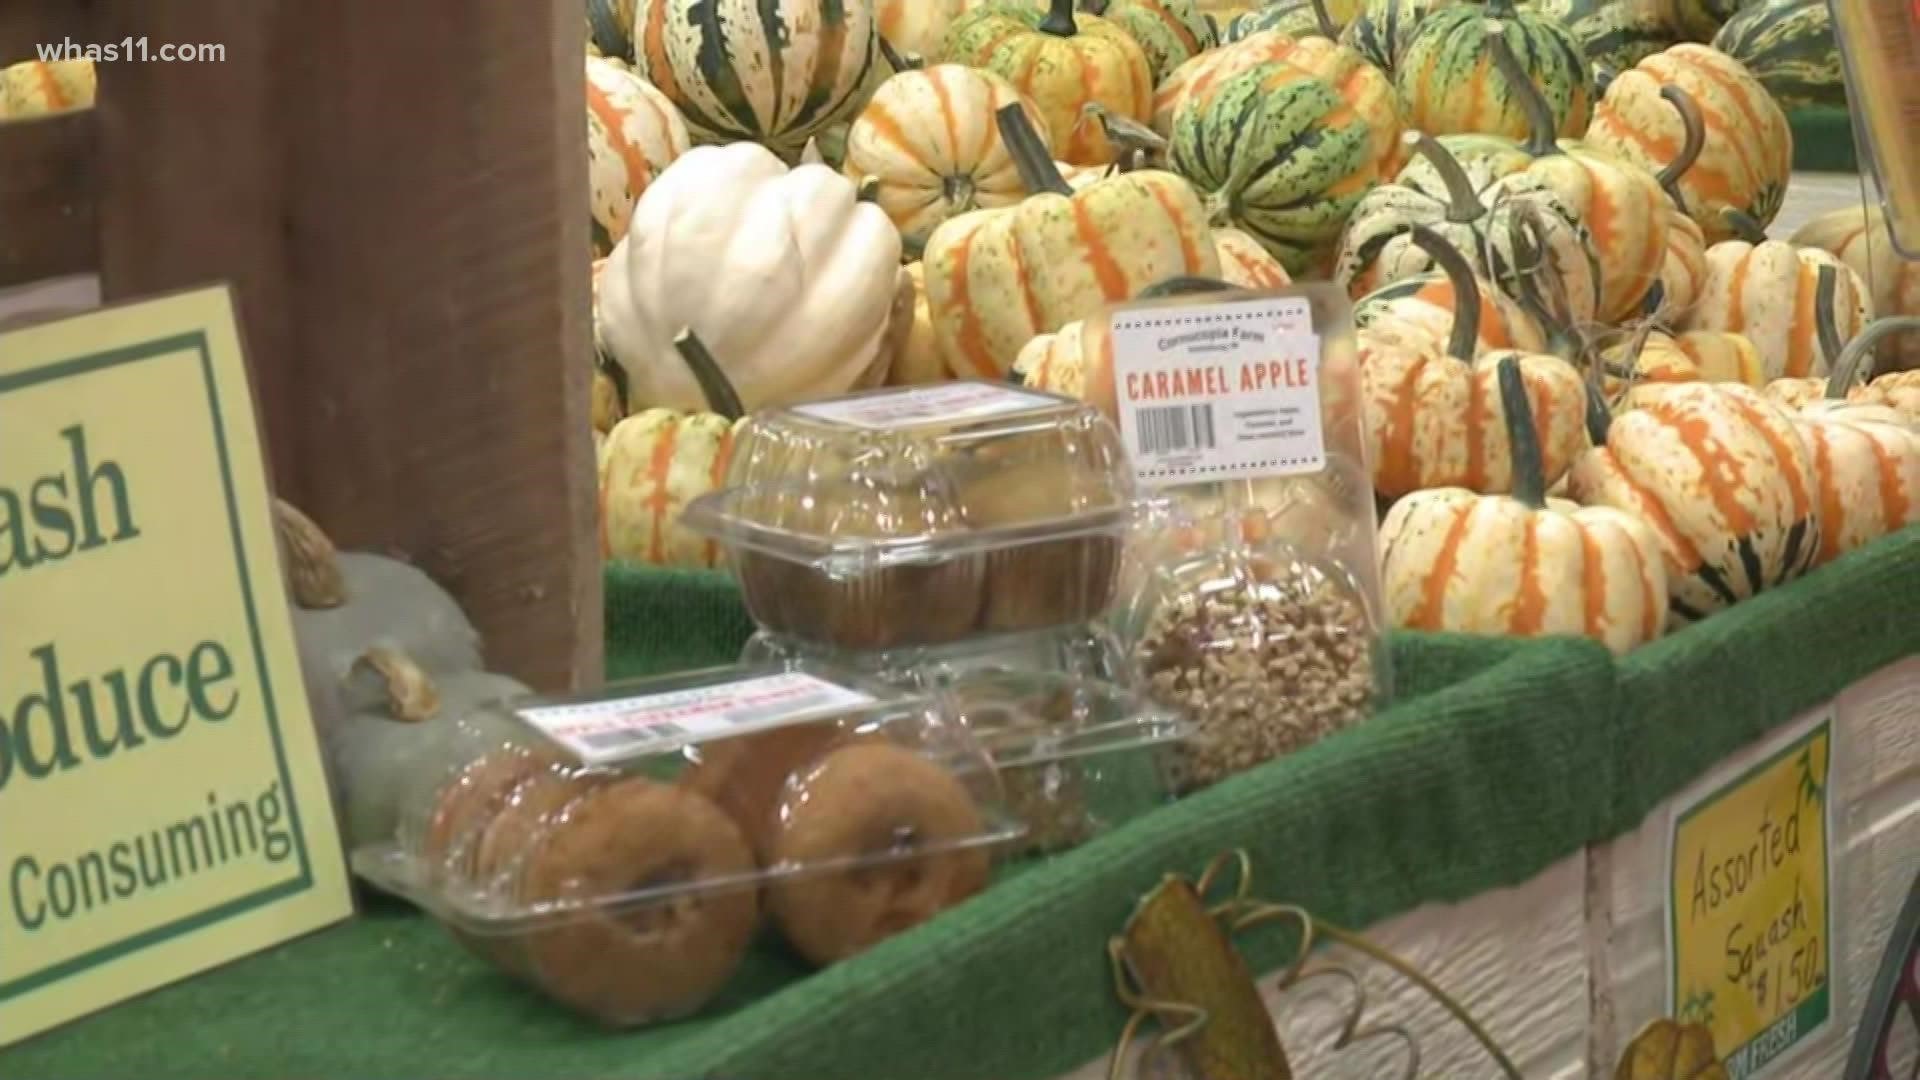 The Carnucopia Farm in Scottsburg is in the full fall season with specialty items at their farmer's market.